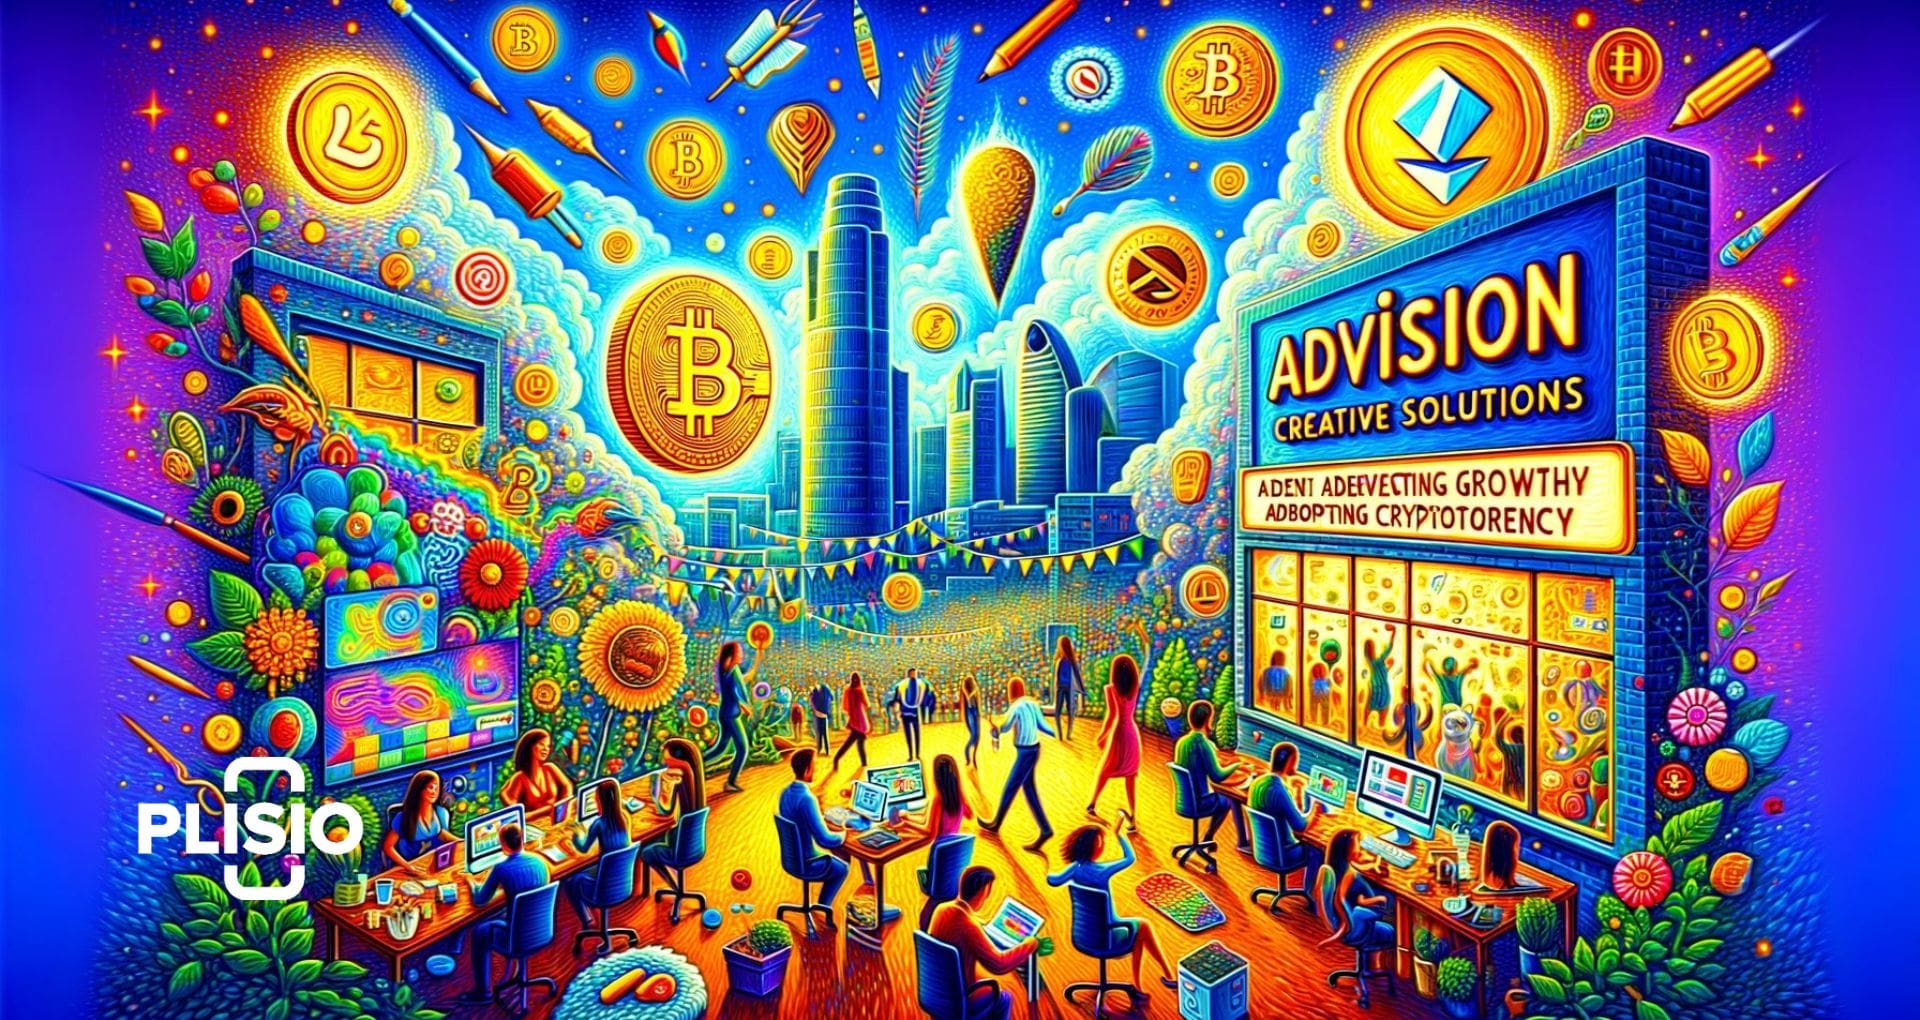 Advertising Agency Adopts Crypto and gets rapid growth!